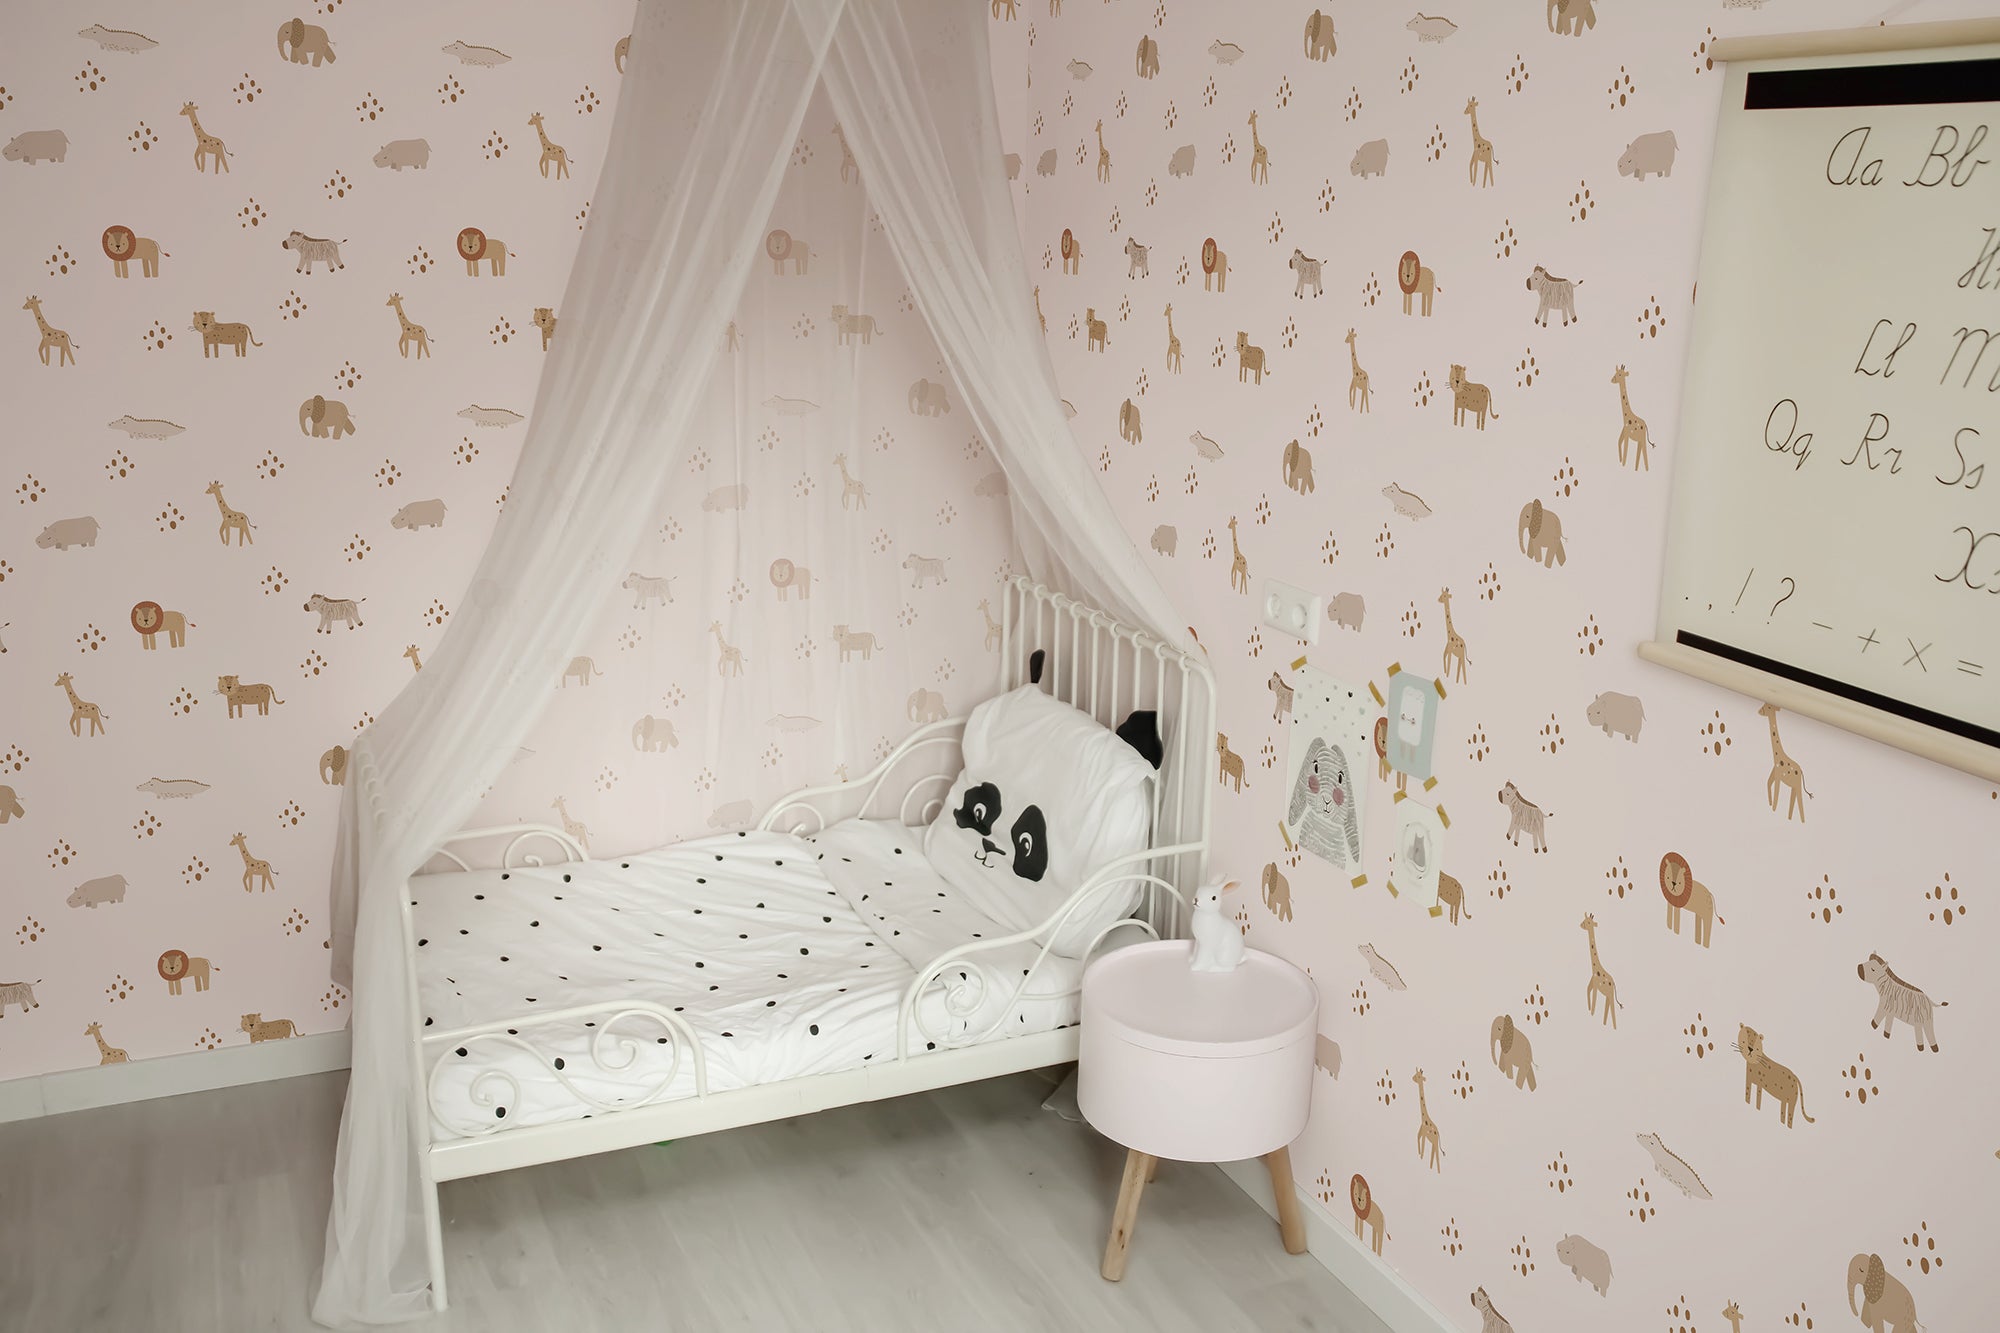 a charming children's bedroom adorned with Safari Animal Wallpaper. This sweet and playful pattern features an array of safari animals such as giraffes, lions, elephants, and zebras in soft brown tones on a pink background. The room is furnished with a white canopy bed with a panda-themed bedding set, and the wall is decorated with whimsical shelves holding toys and educational materials, creating a delightful and imaginative space for a child.